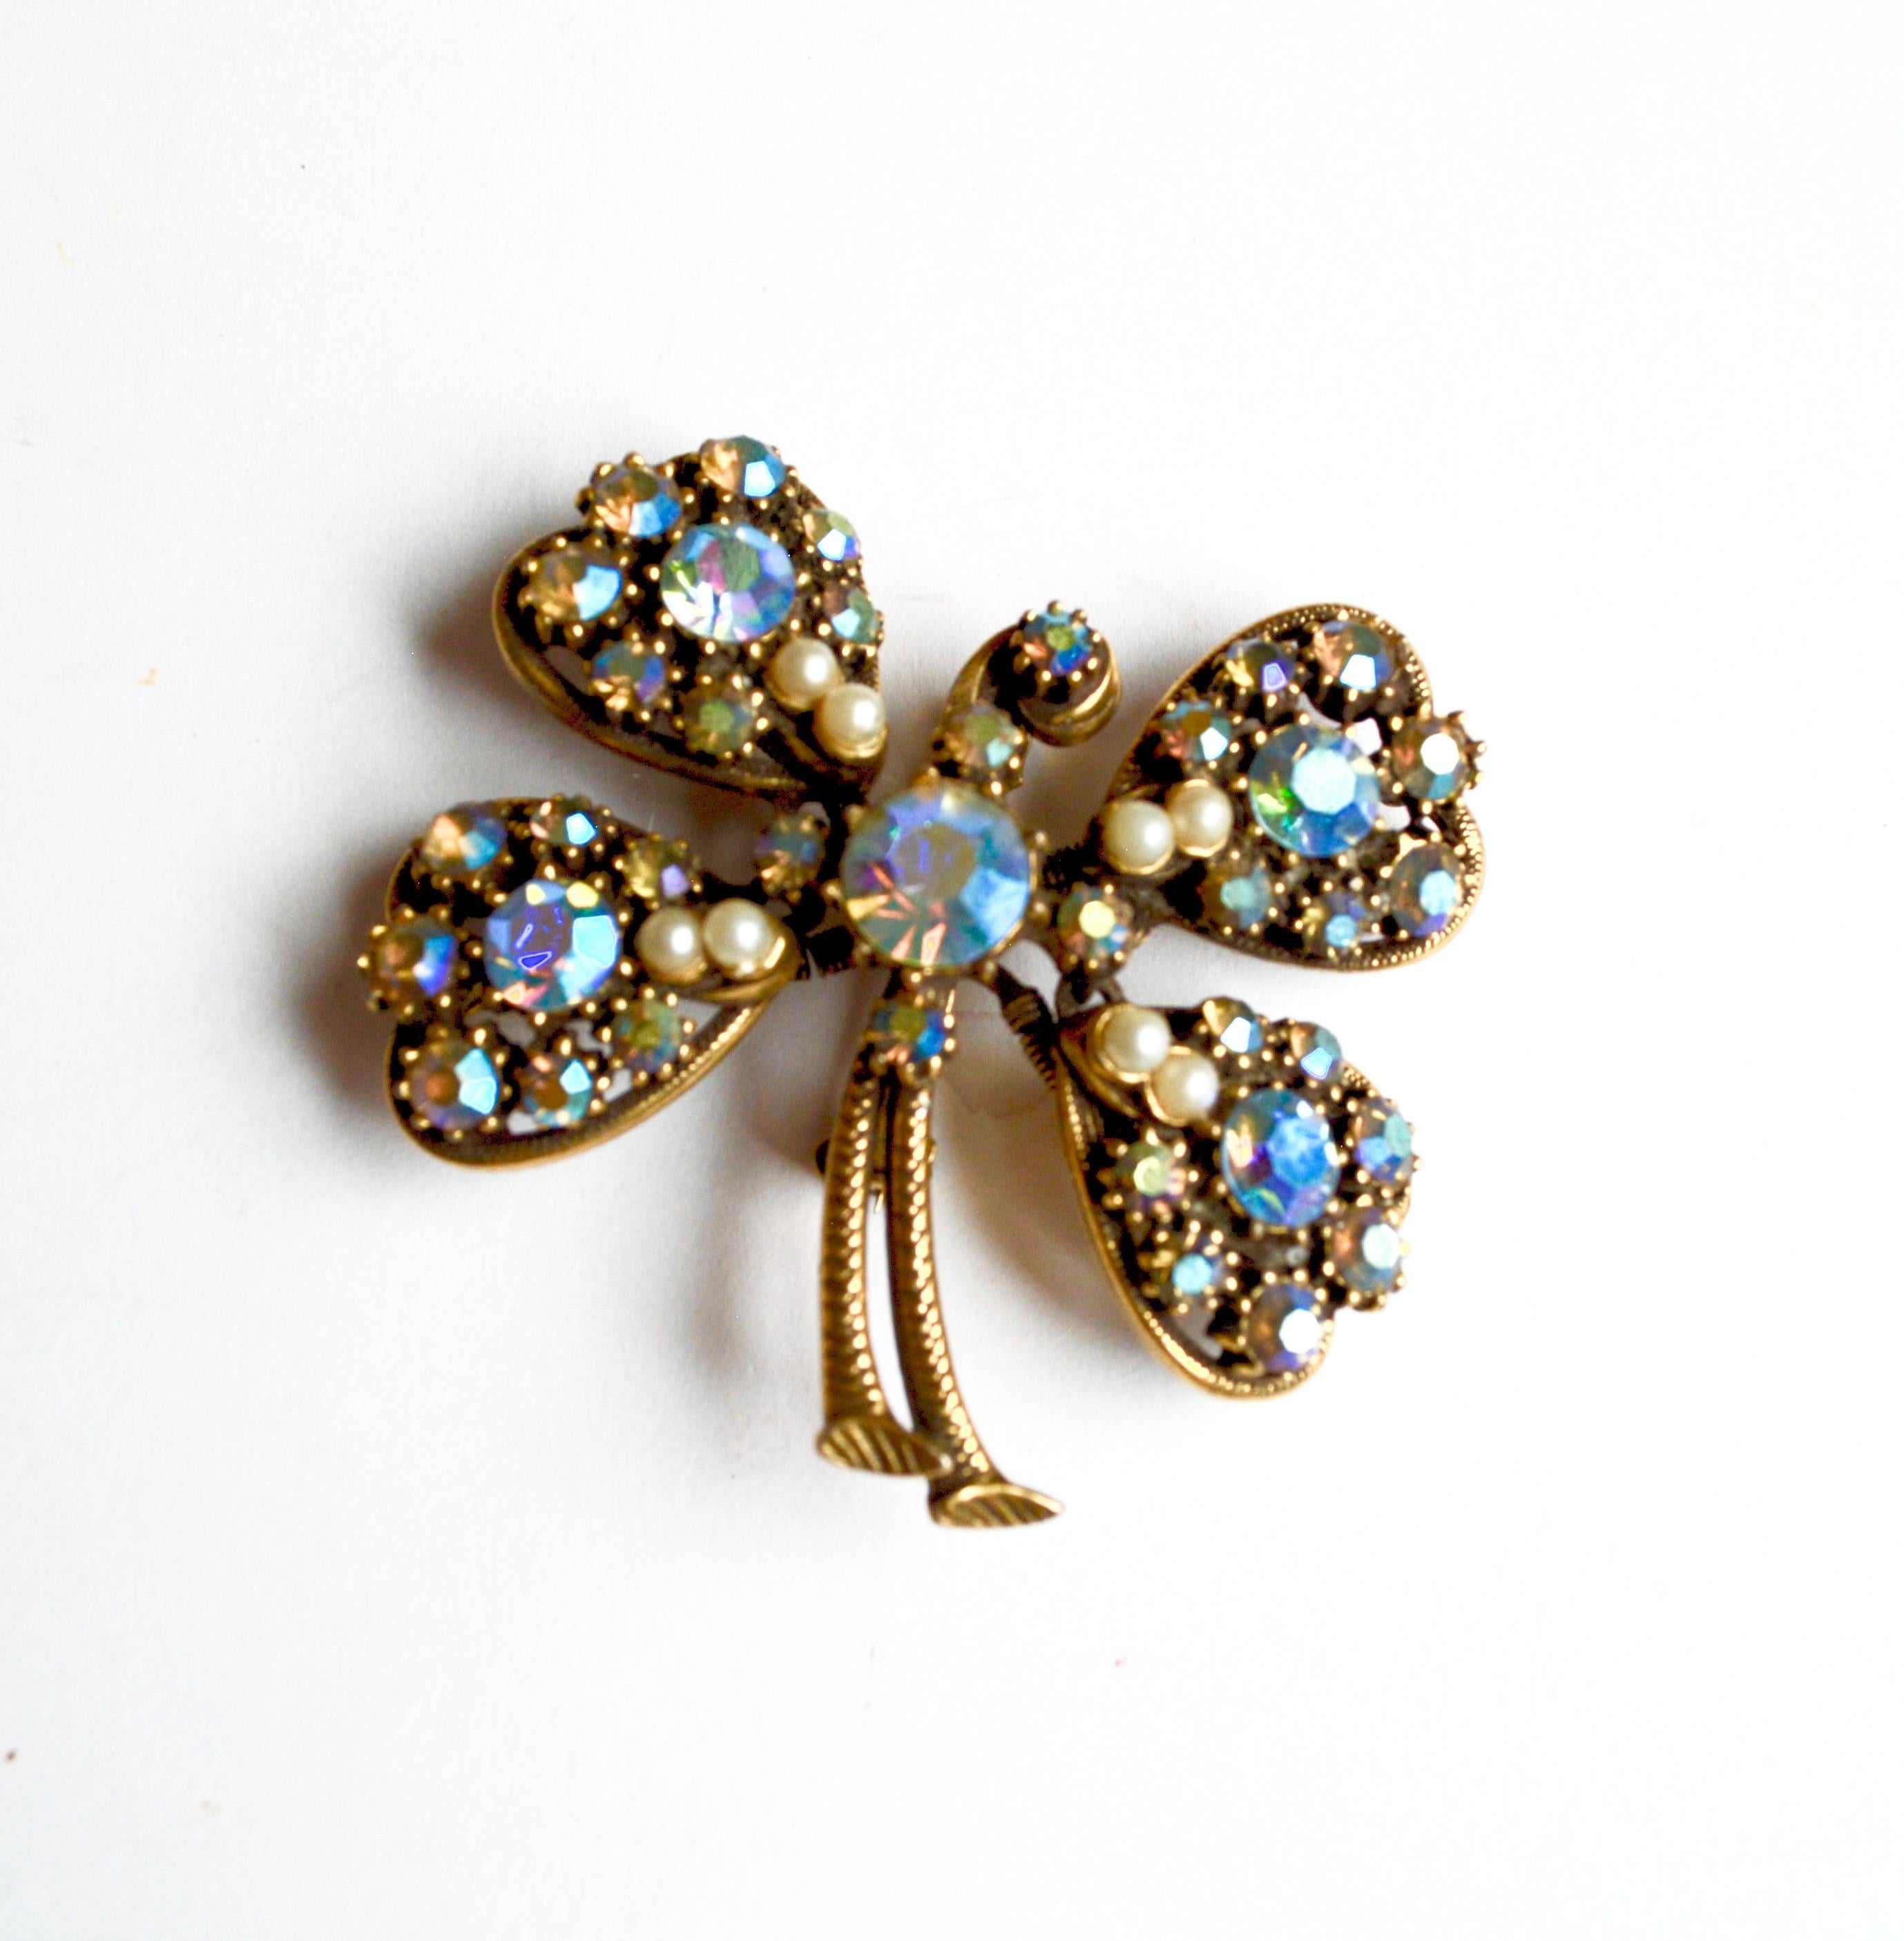 Florenza 4 Leaf Clover Trembler Brooch  In Good Condition For Sale In Litchfield County, CT